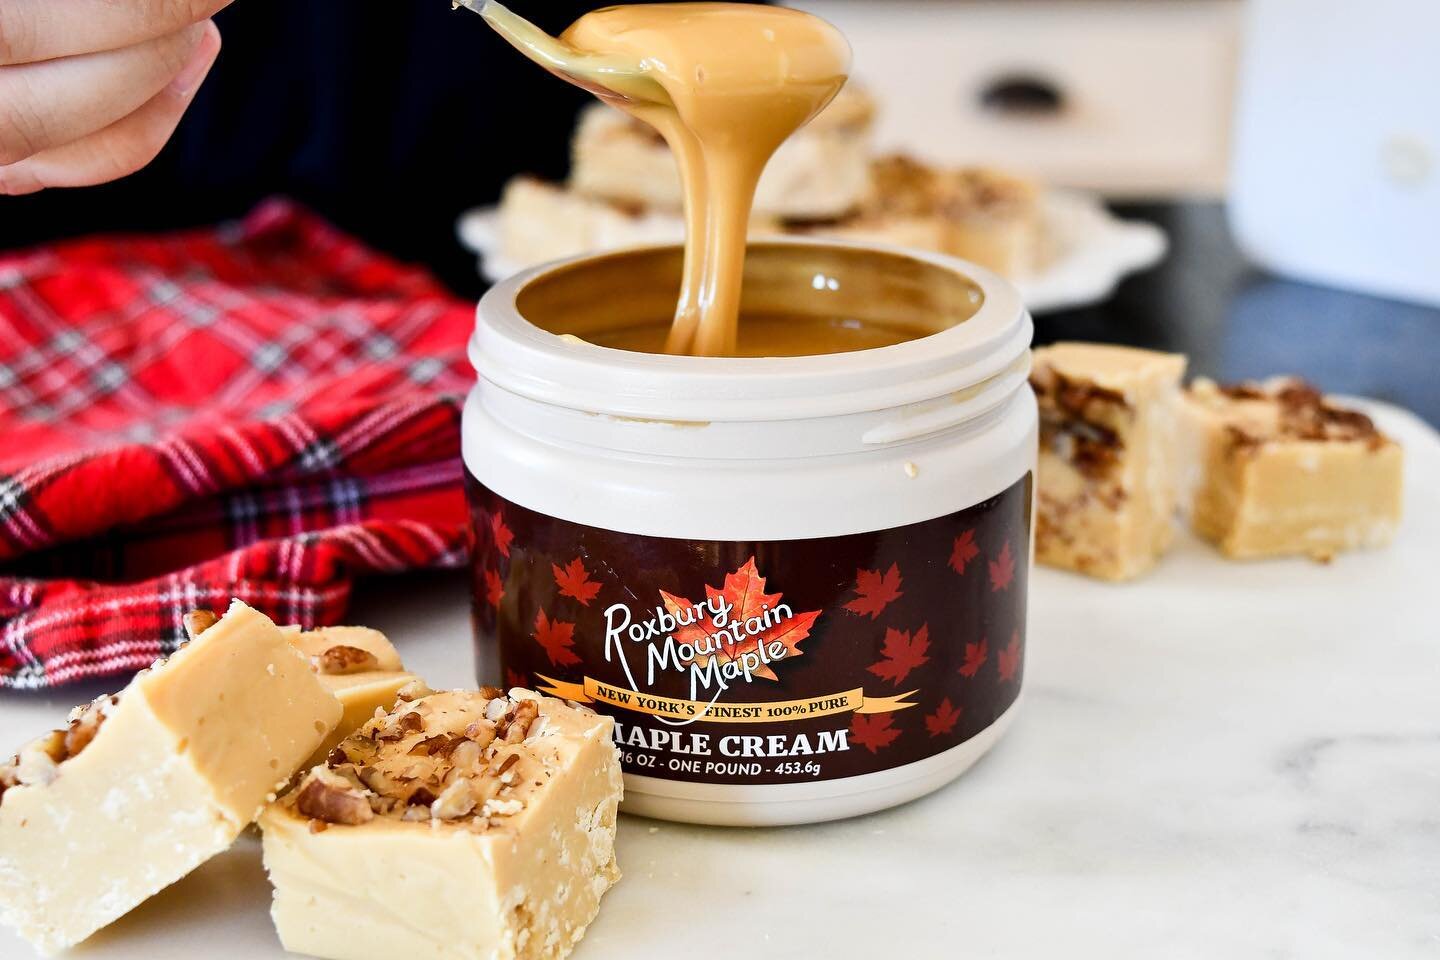 Maple cream sale! Maple cream will be 15% off November 13th - 23rd at all our physical locations and website.